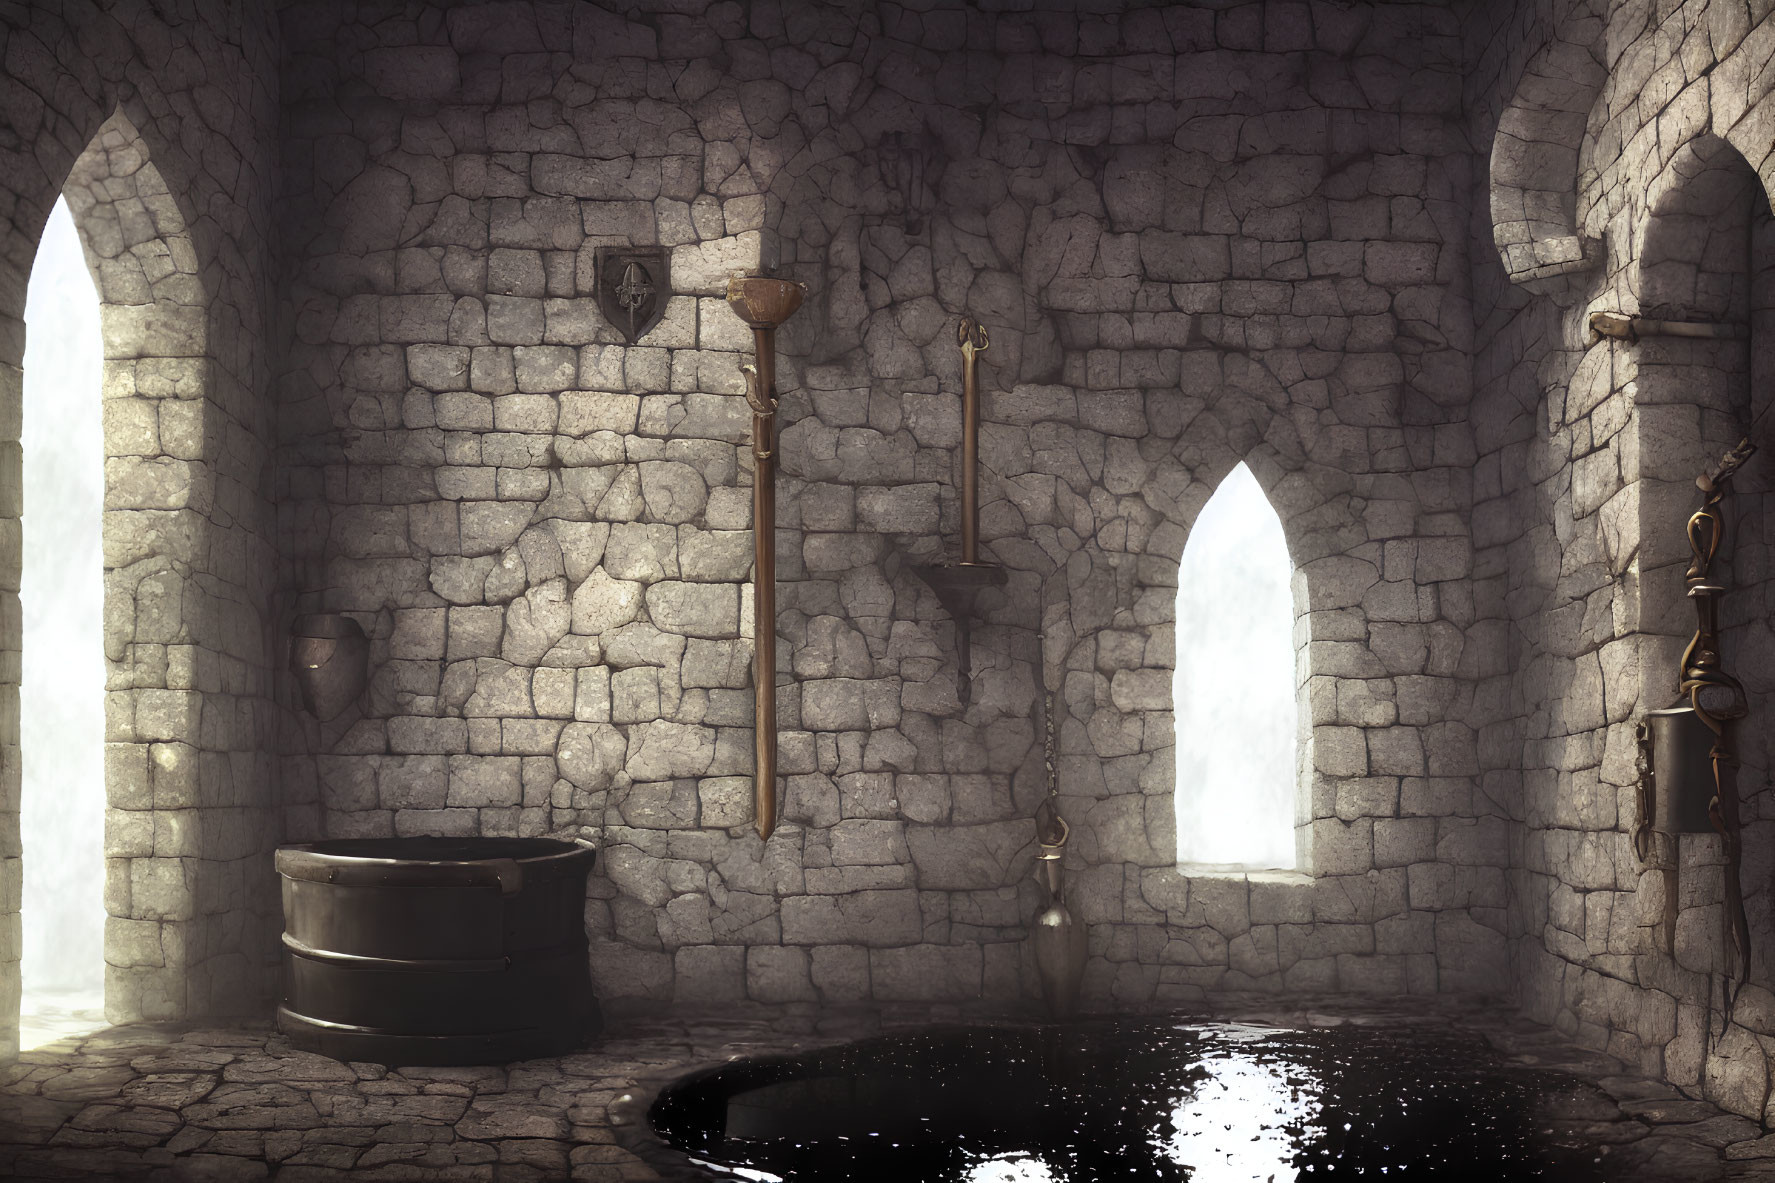 Medieval dungeon with stone walls, archway, well, chains, and torture instruments